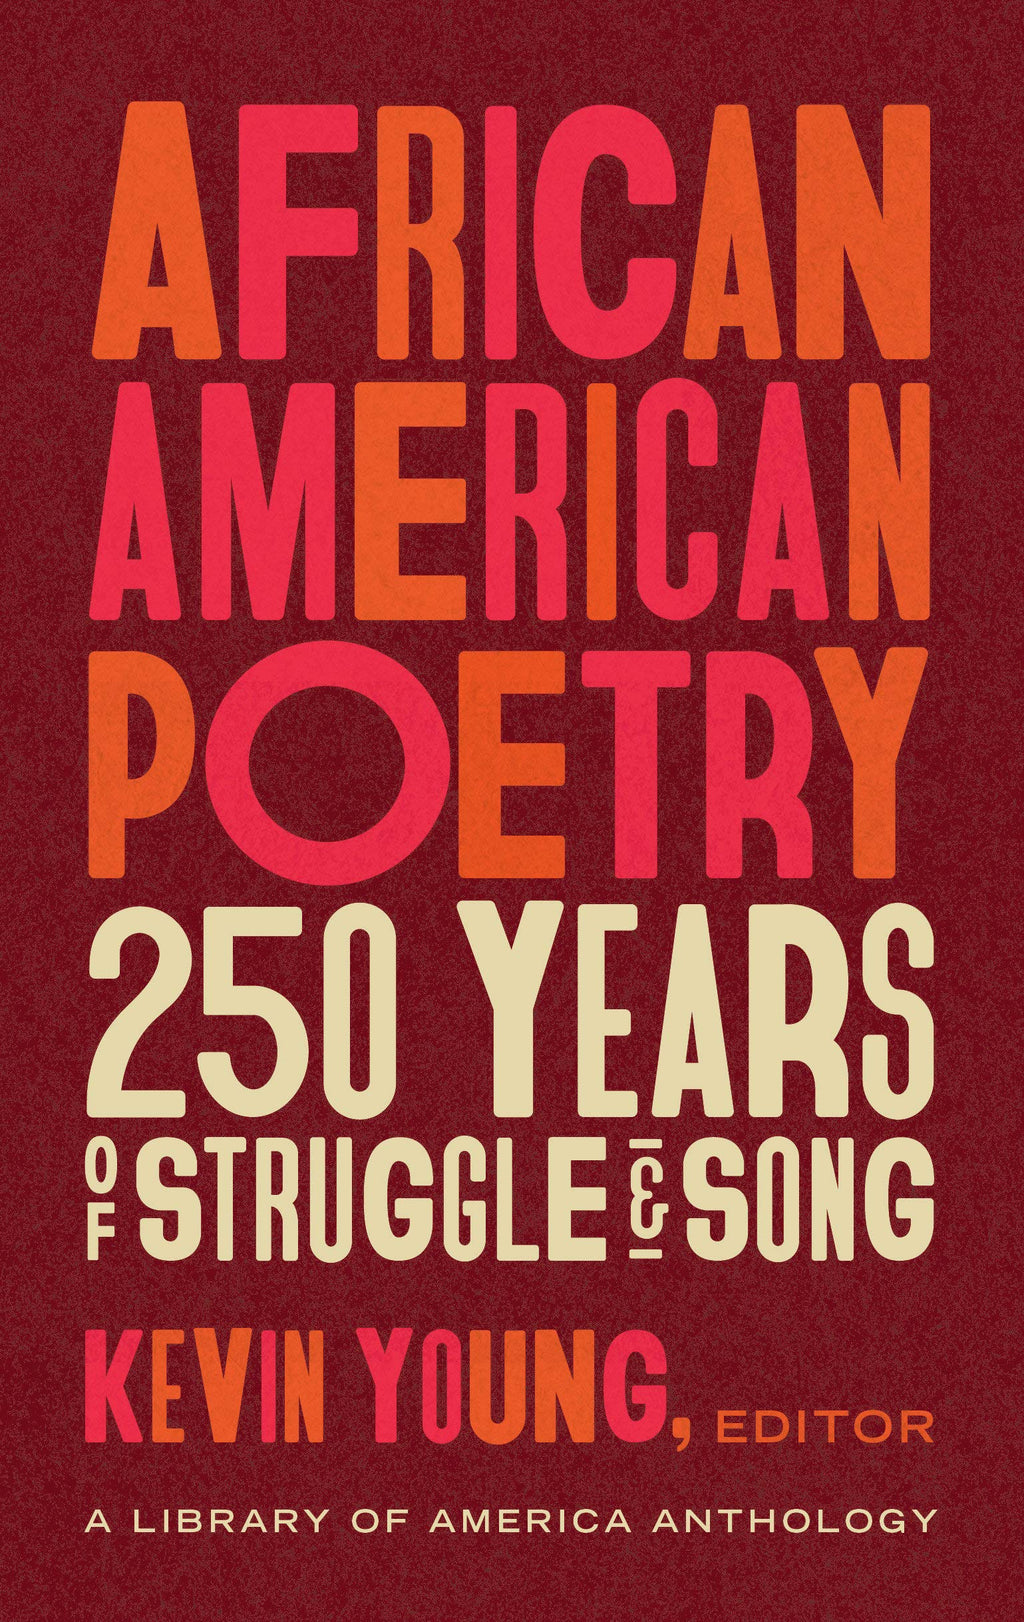 African American Poetry by Kevin Young (ed.)